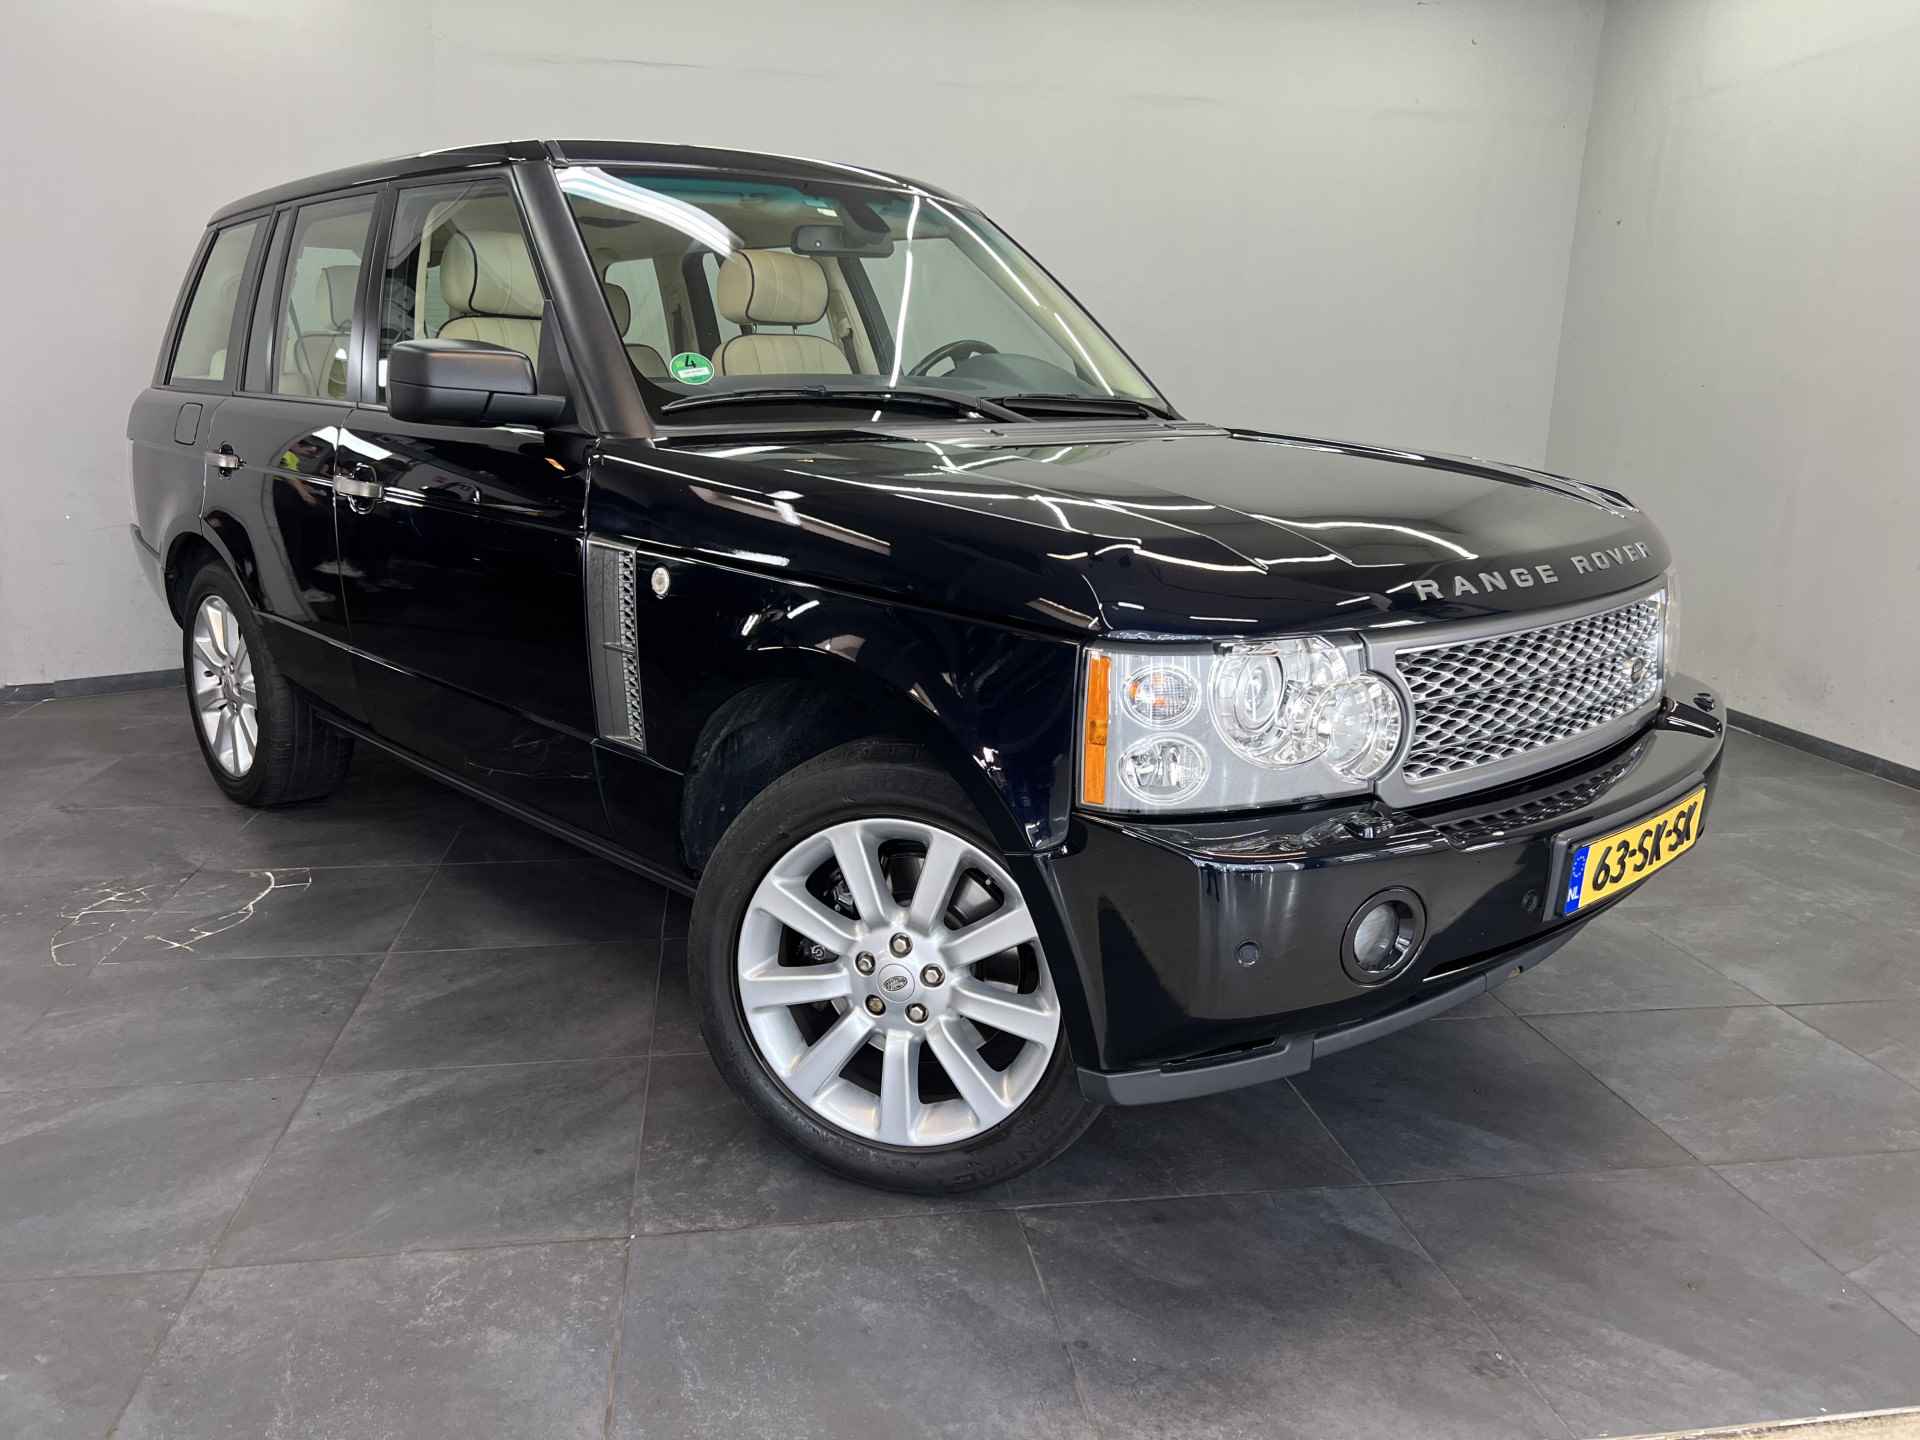 Land Rover Range Rover 4.2 V8 Supercharged ✅UNIEKE STAAT✅Airco✅Cruise controle✅Navigatie✅5 deurs✅TREKHAAK - 31/52